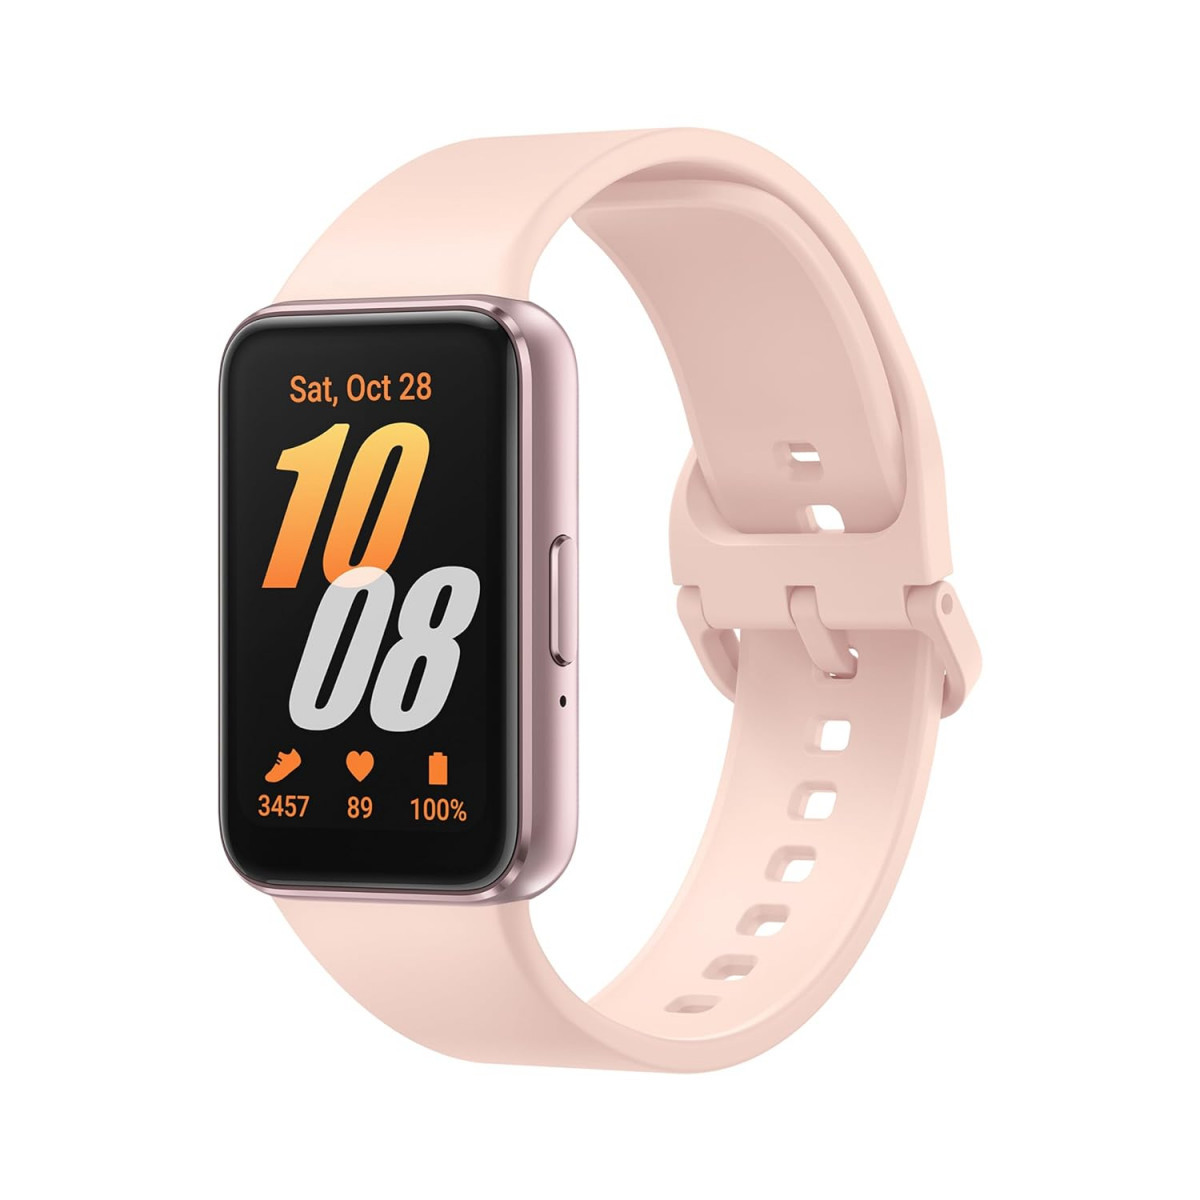 Samsung Galaxy Fit3 Pink Gold 40mm AMOLED Display with Aluminium Body Comprehensive Fitness and Health Tracking Upto 13-Day Battery with Fast Charging 5ATM  IP68 Rating